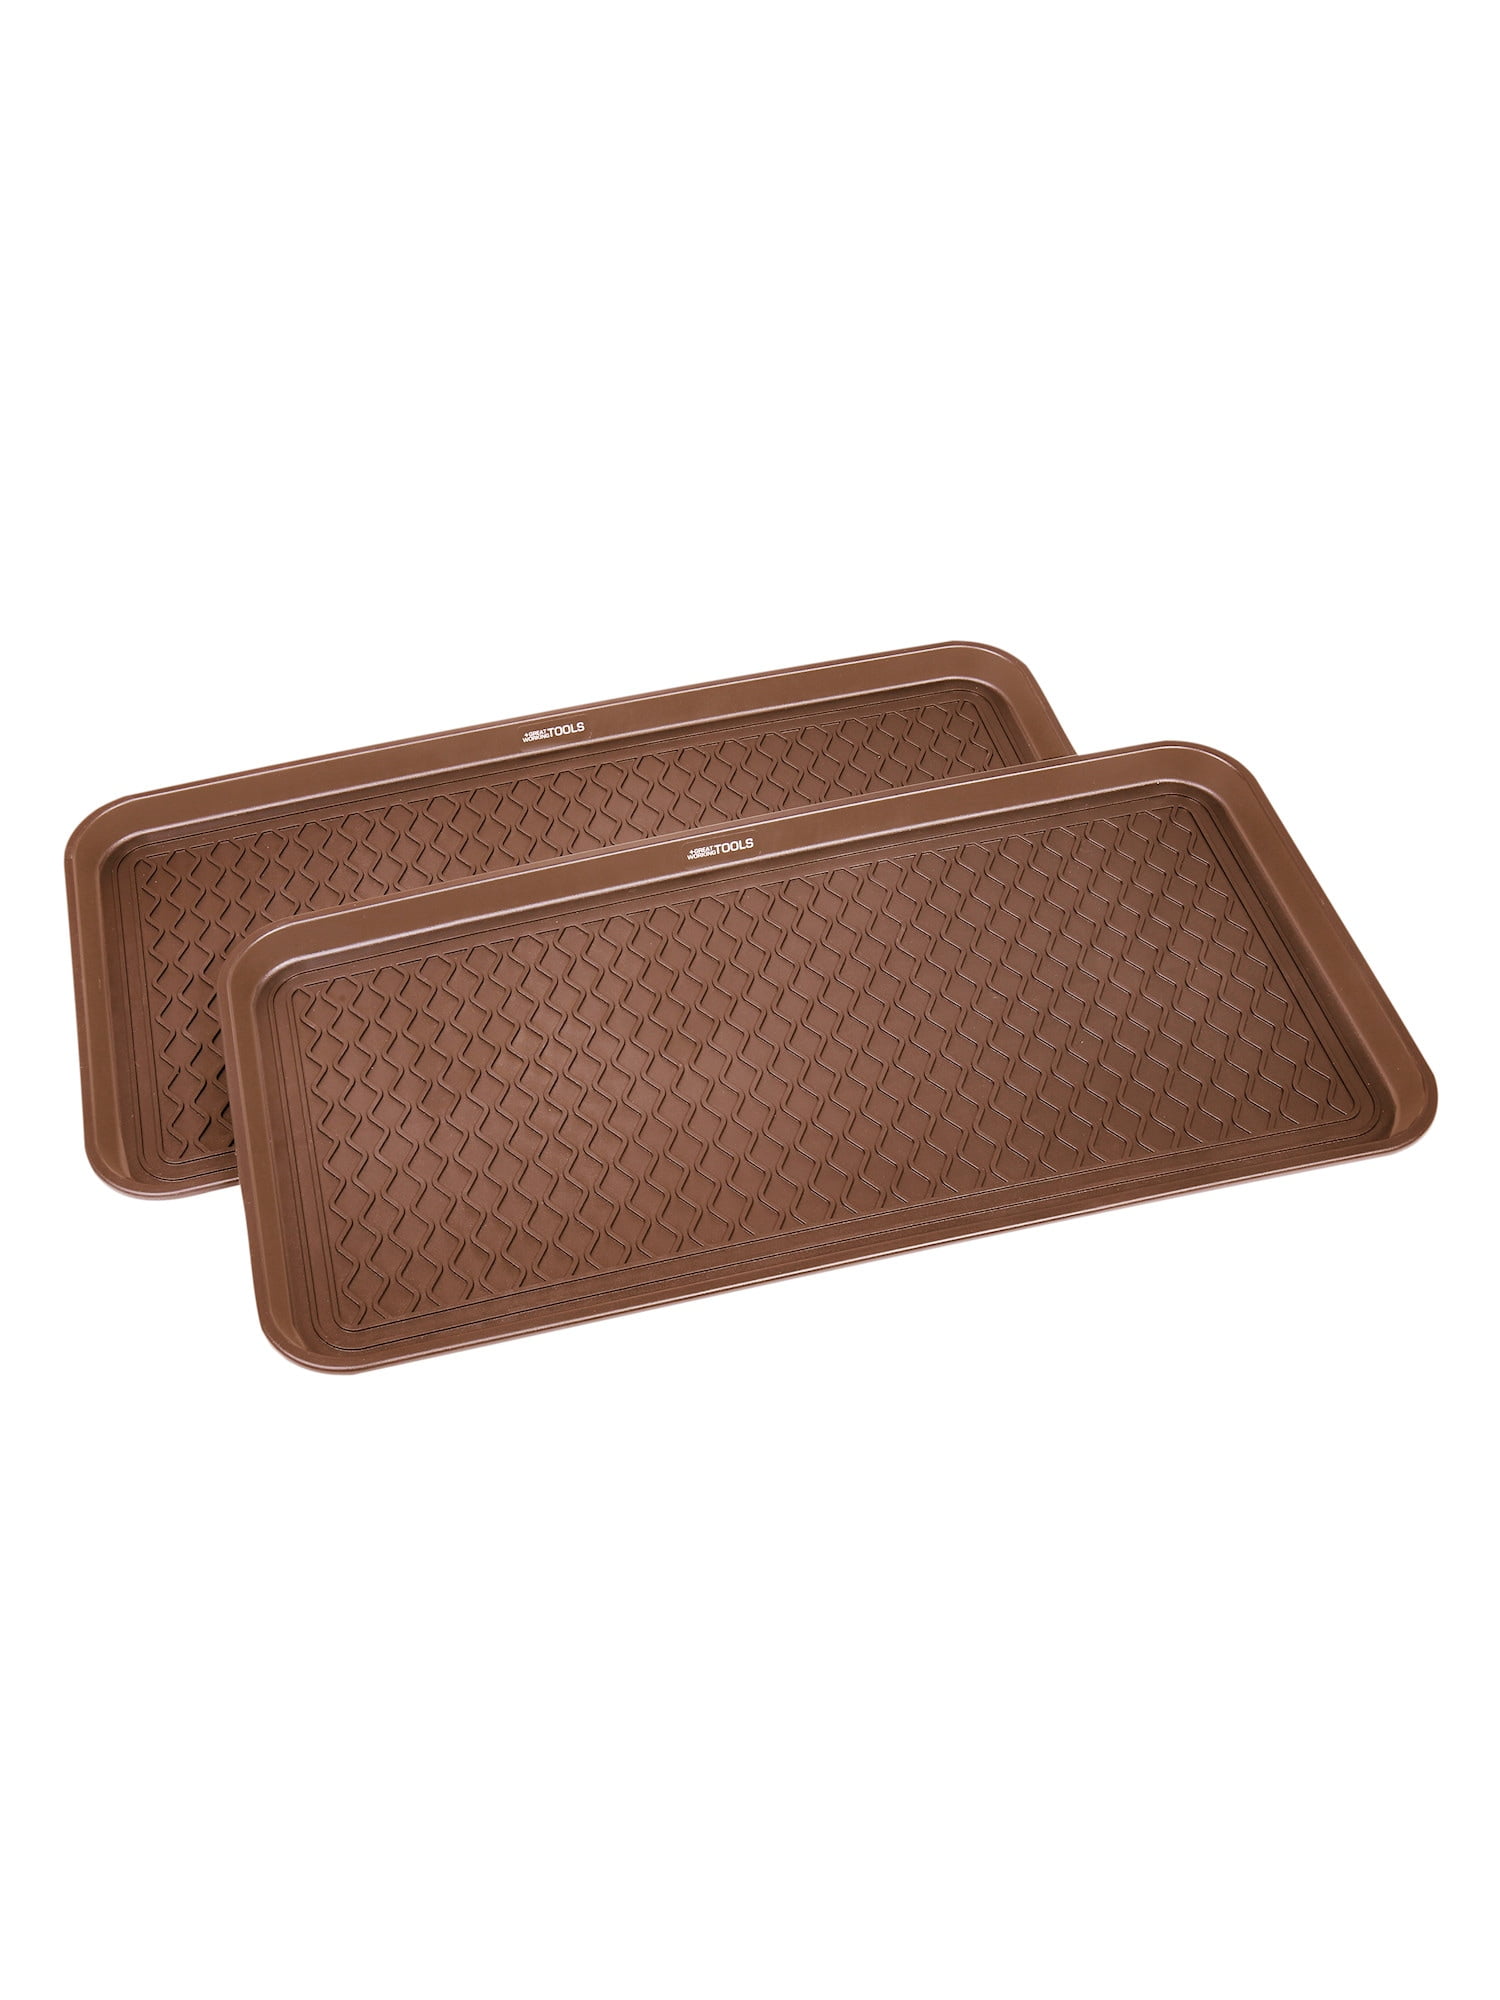 Great Working Tools Boot Trays Set of 2 All Weather Heavy Duty Shoe Trays 